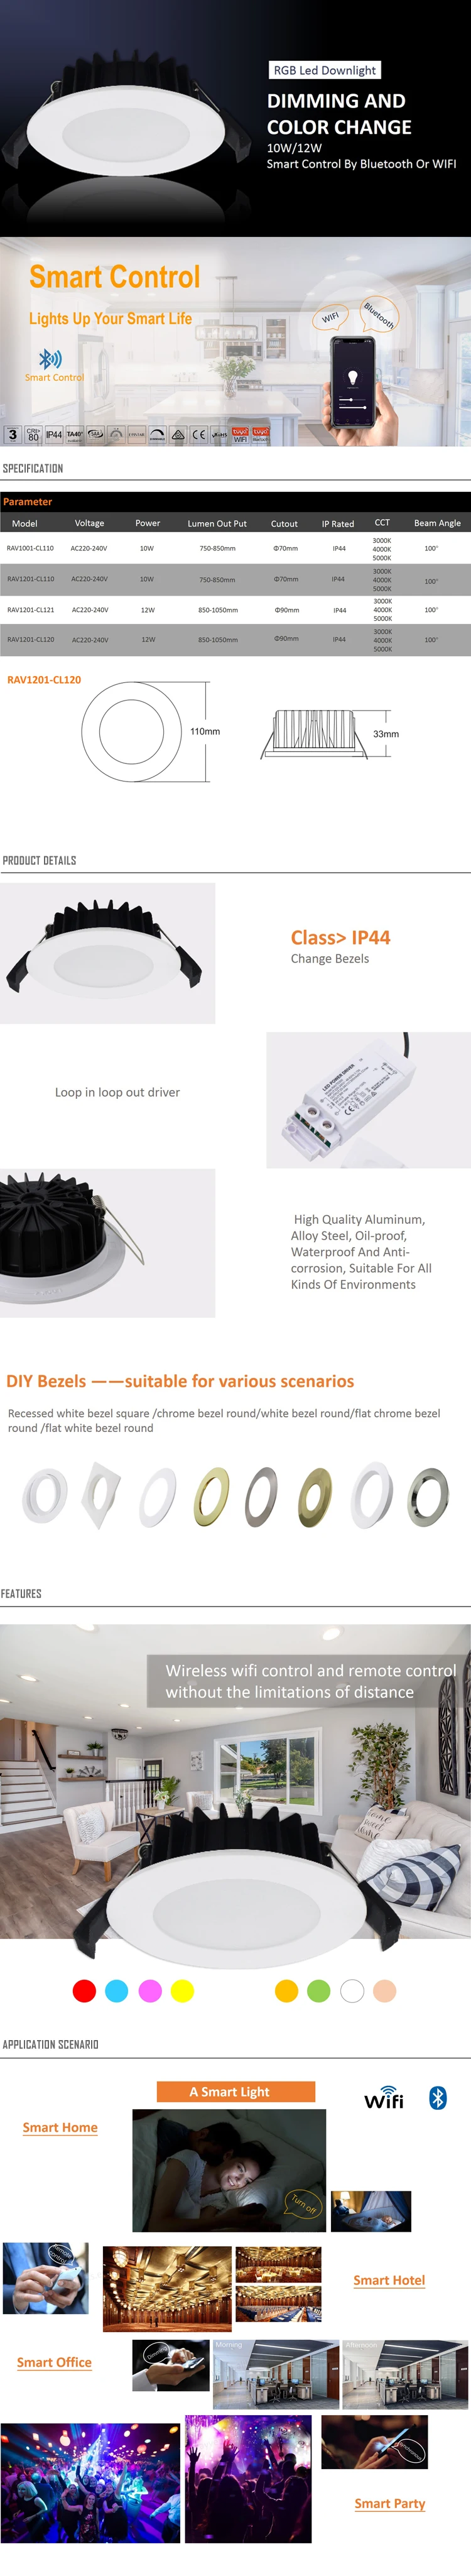 WIFI bluetooth APP control recessed dimmable led downlight 12w